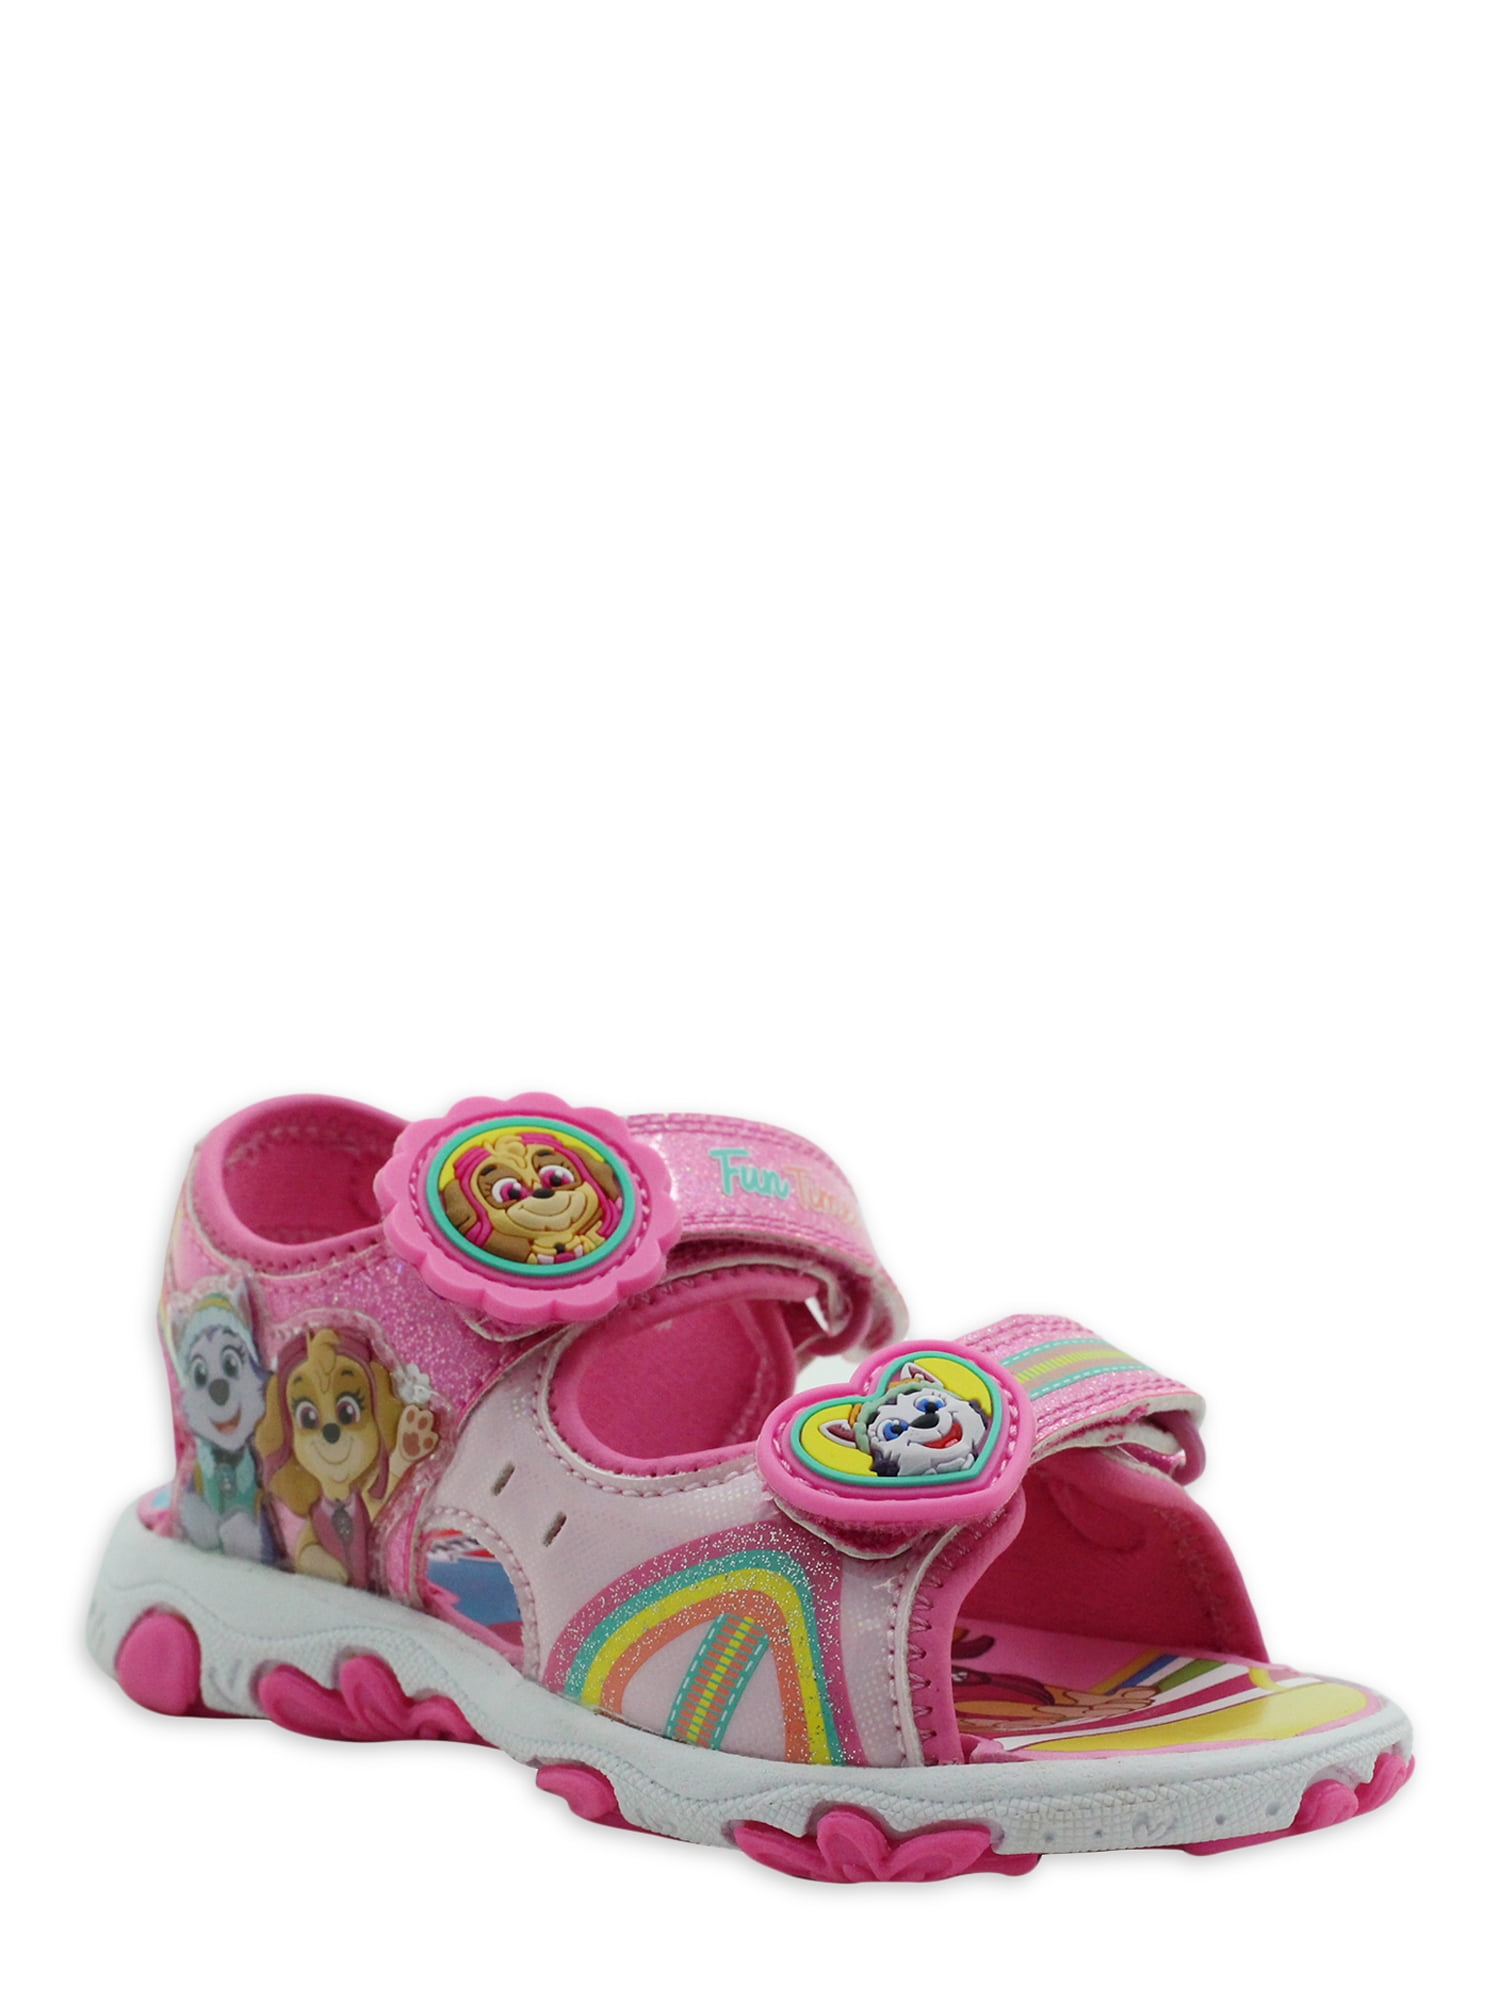 Girls Paw Patrol Skye and Everest Pink and White Trainers 